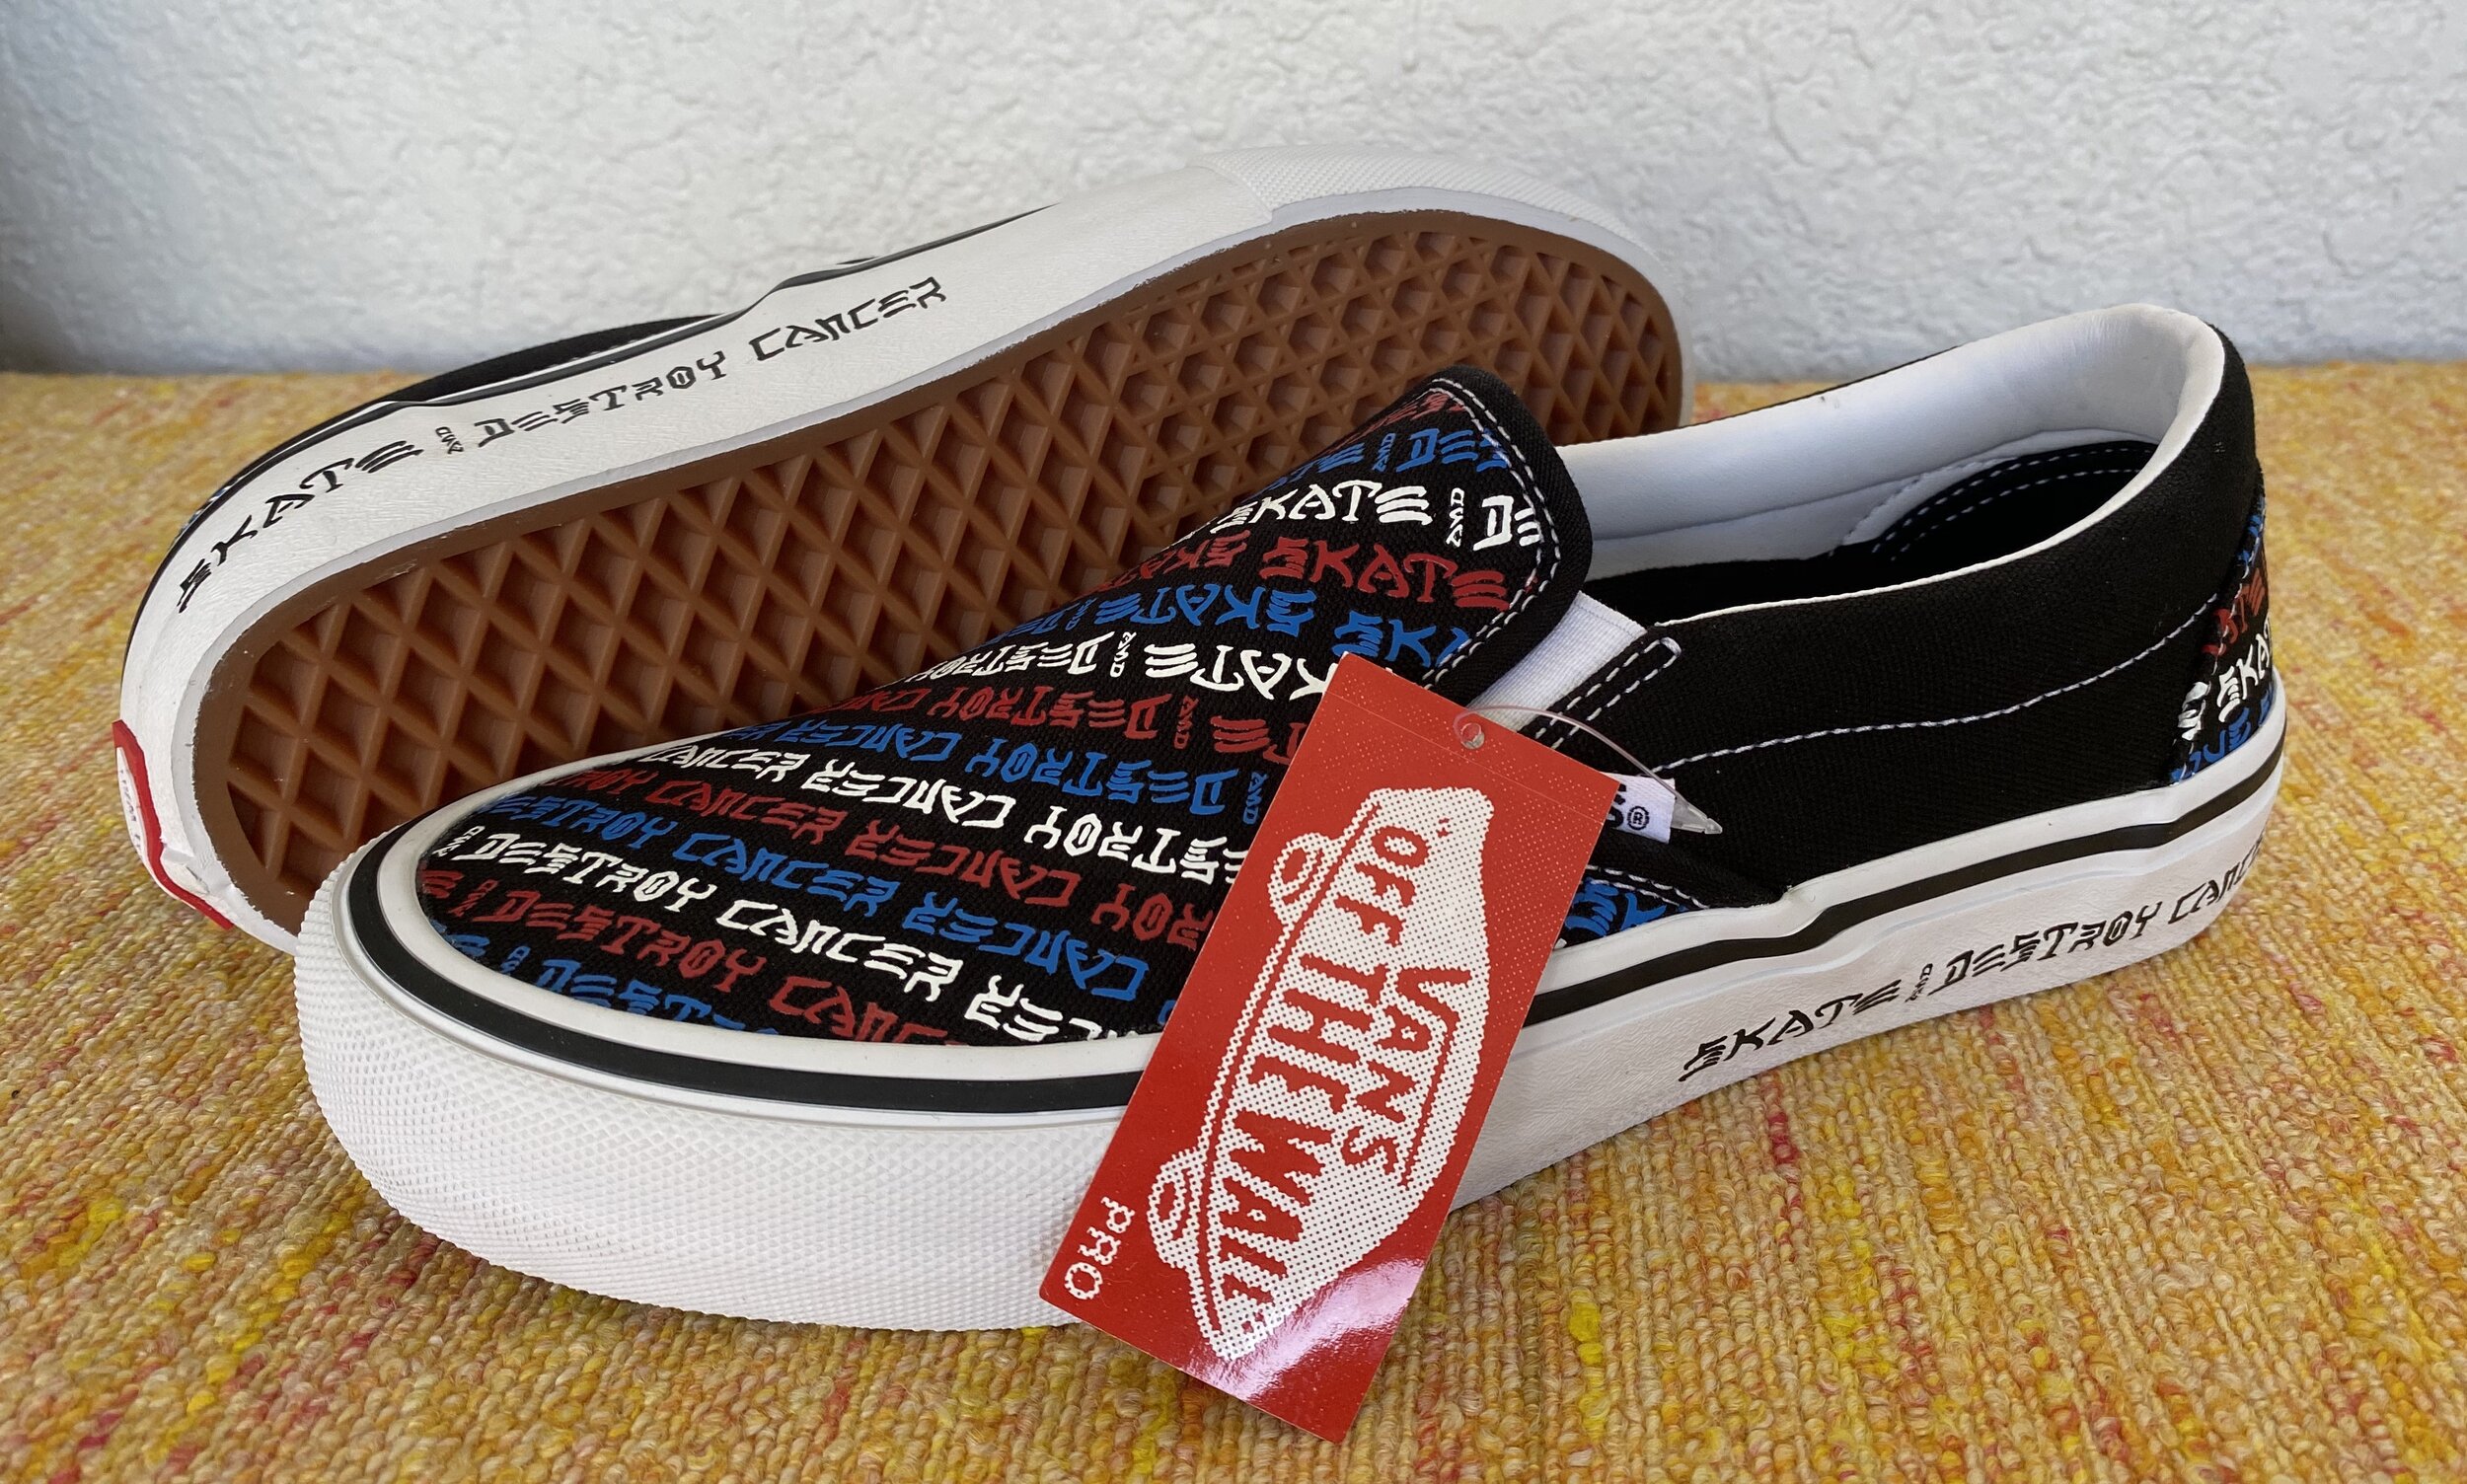 Red/White/Blue VANS PRO SKATE “SKATE AND DESTROY SLIP-ON SHOES WITH ULTRACUSH INSOLE plus DURACAP —